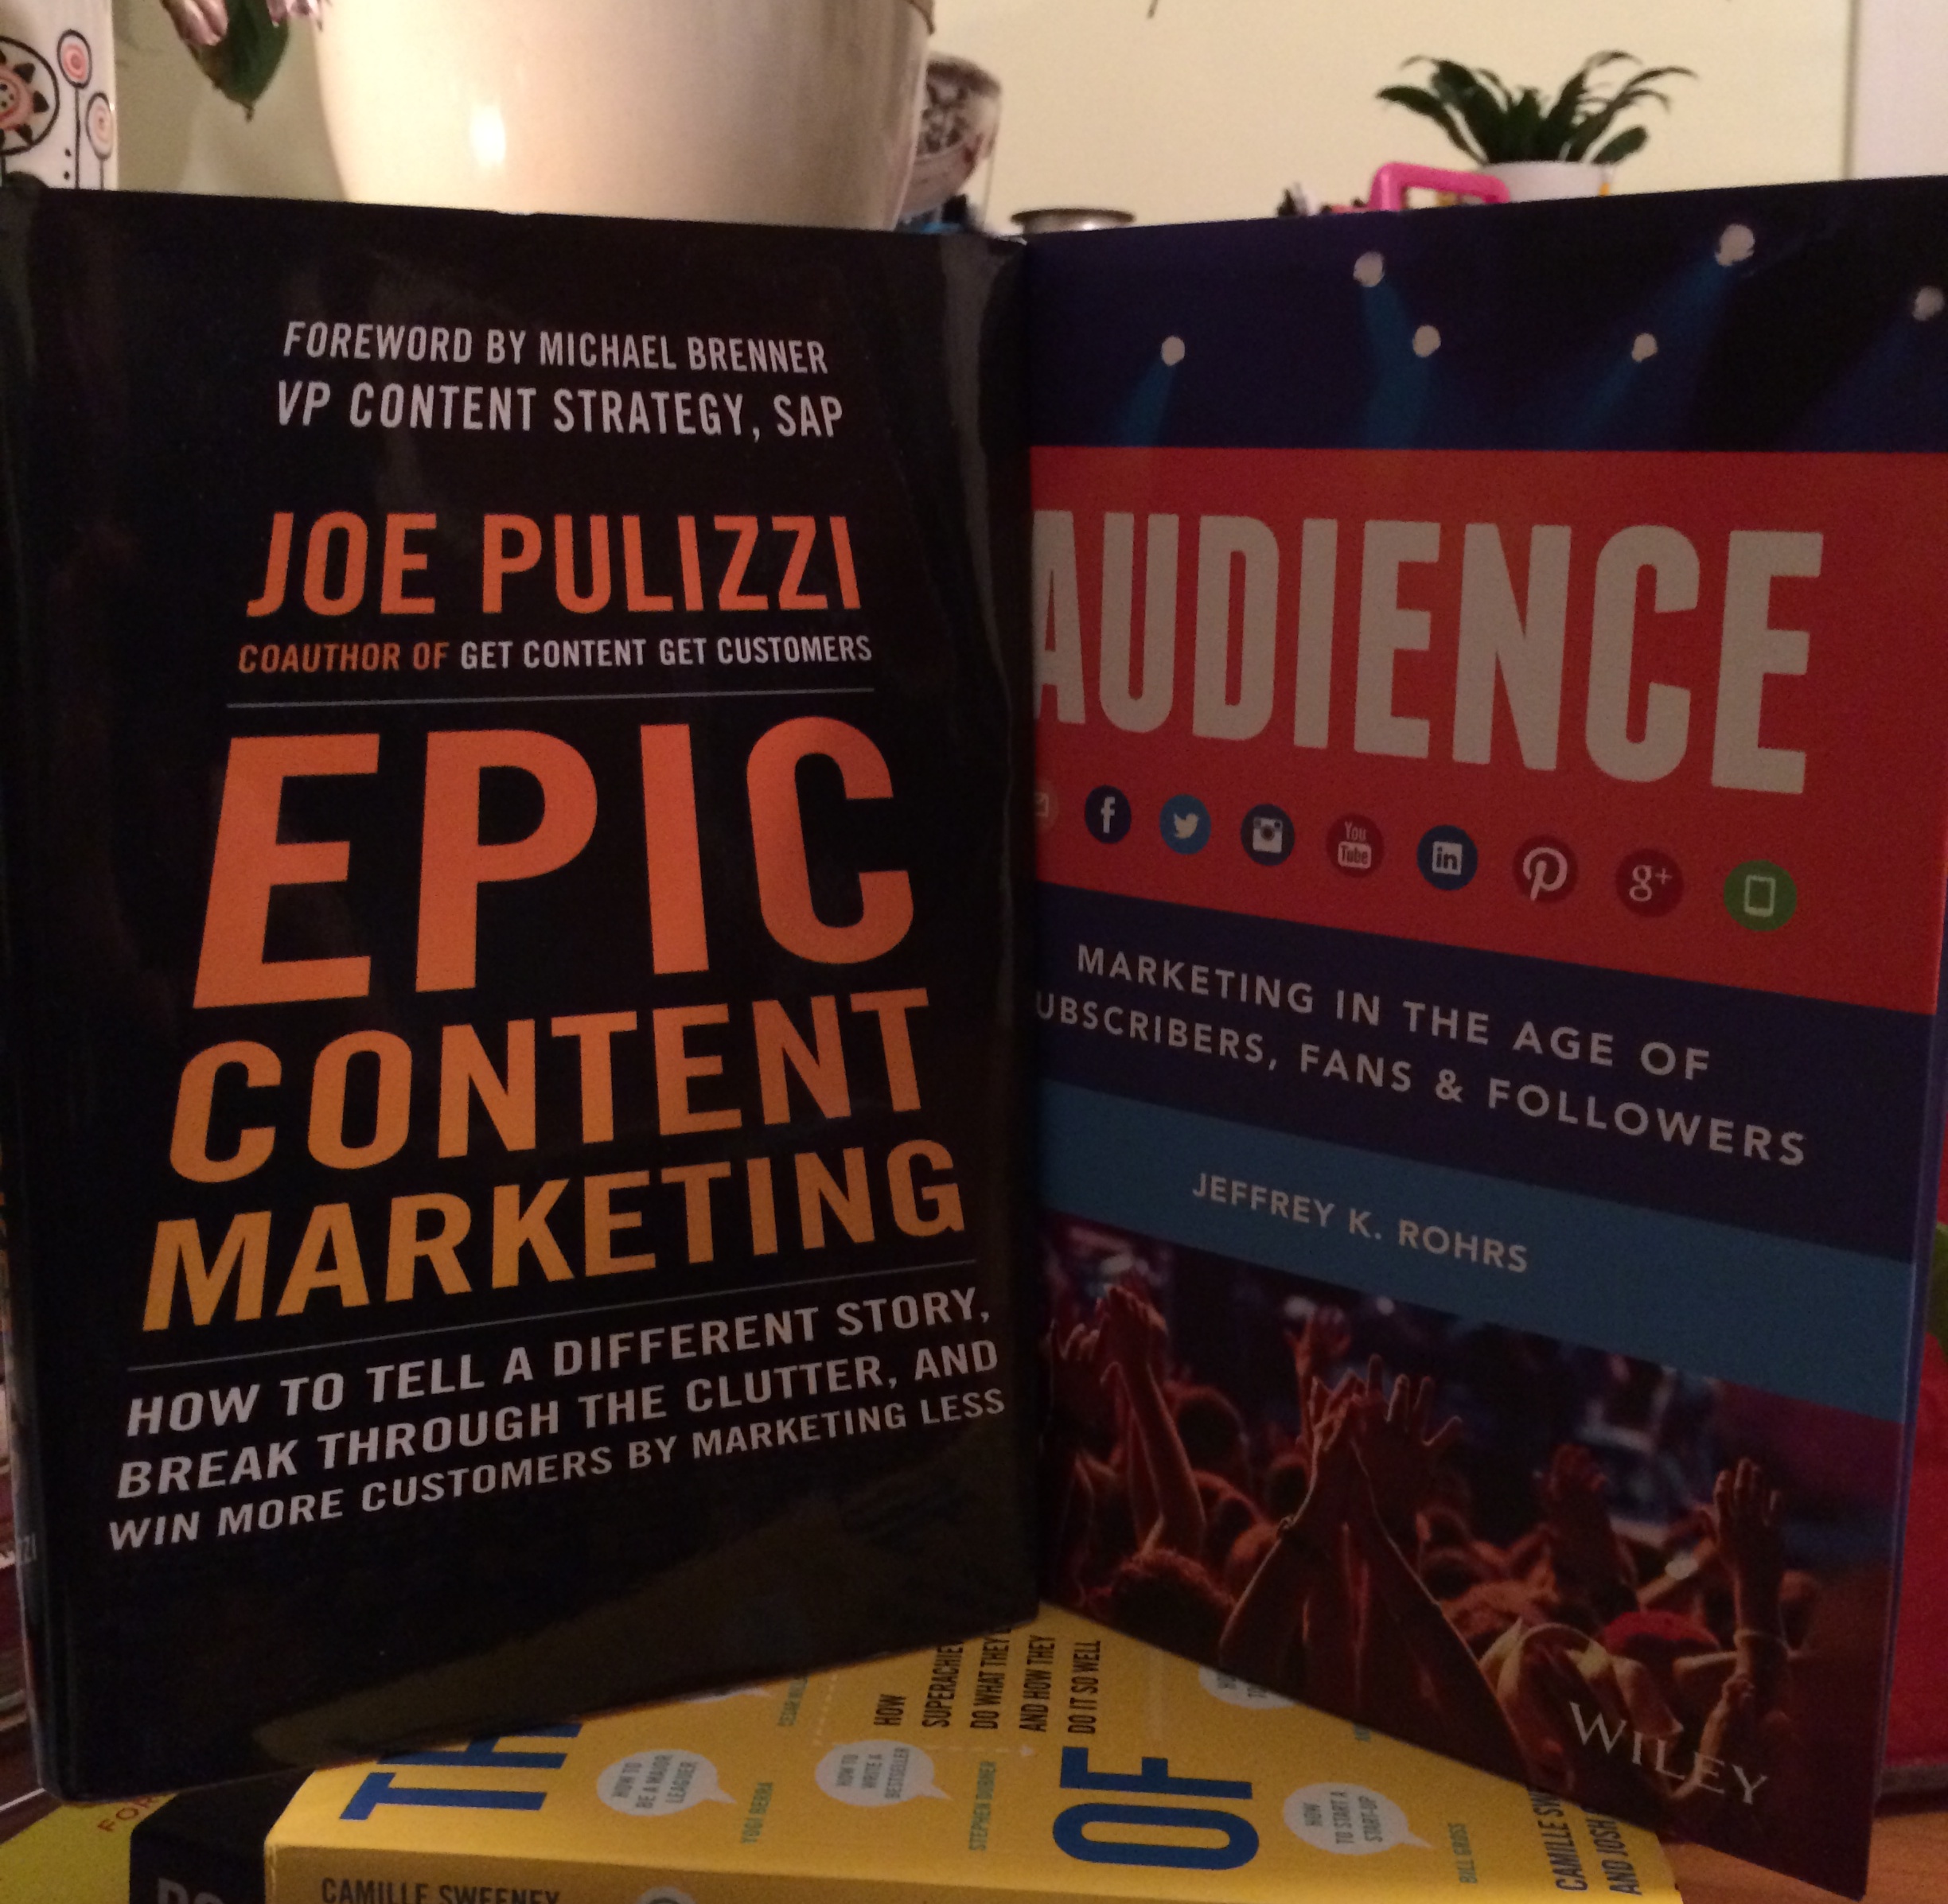 Audience and Epic Content Marketing